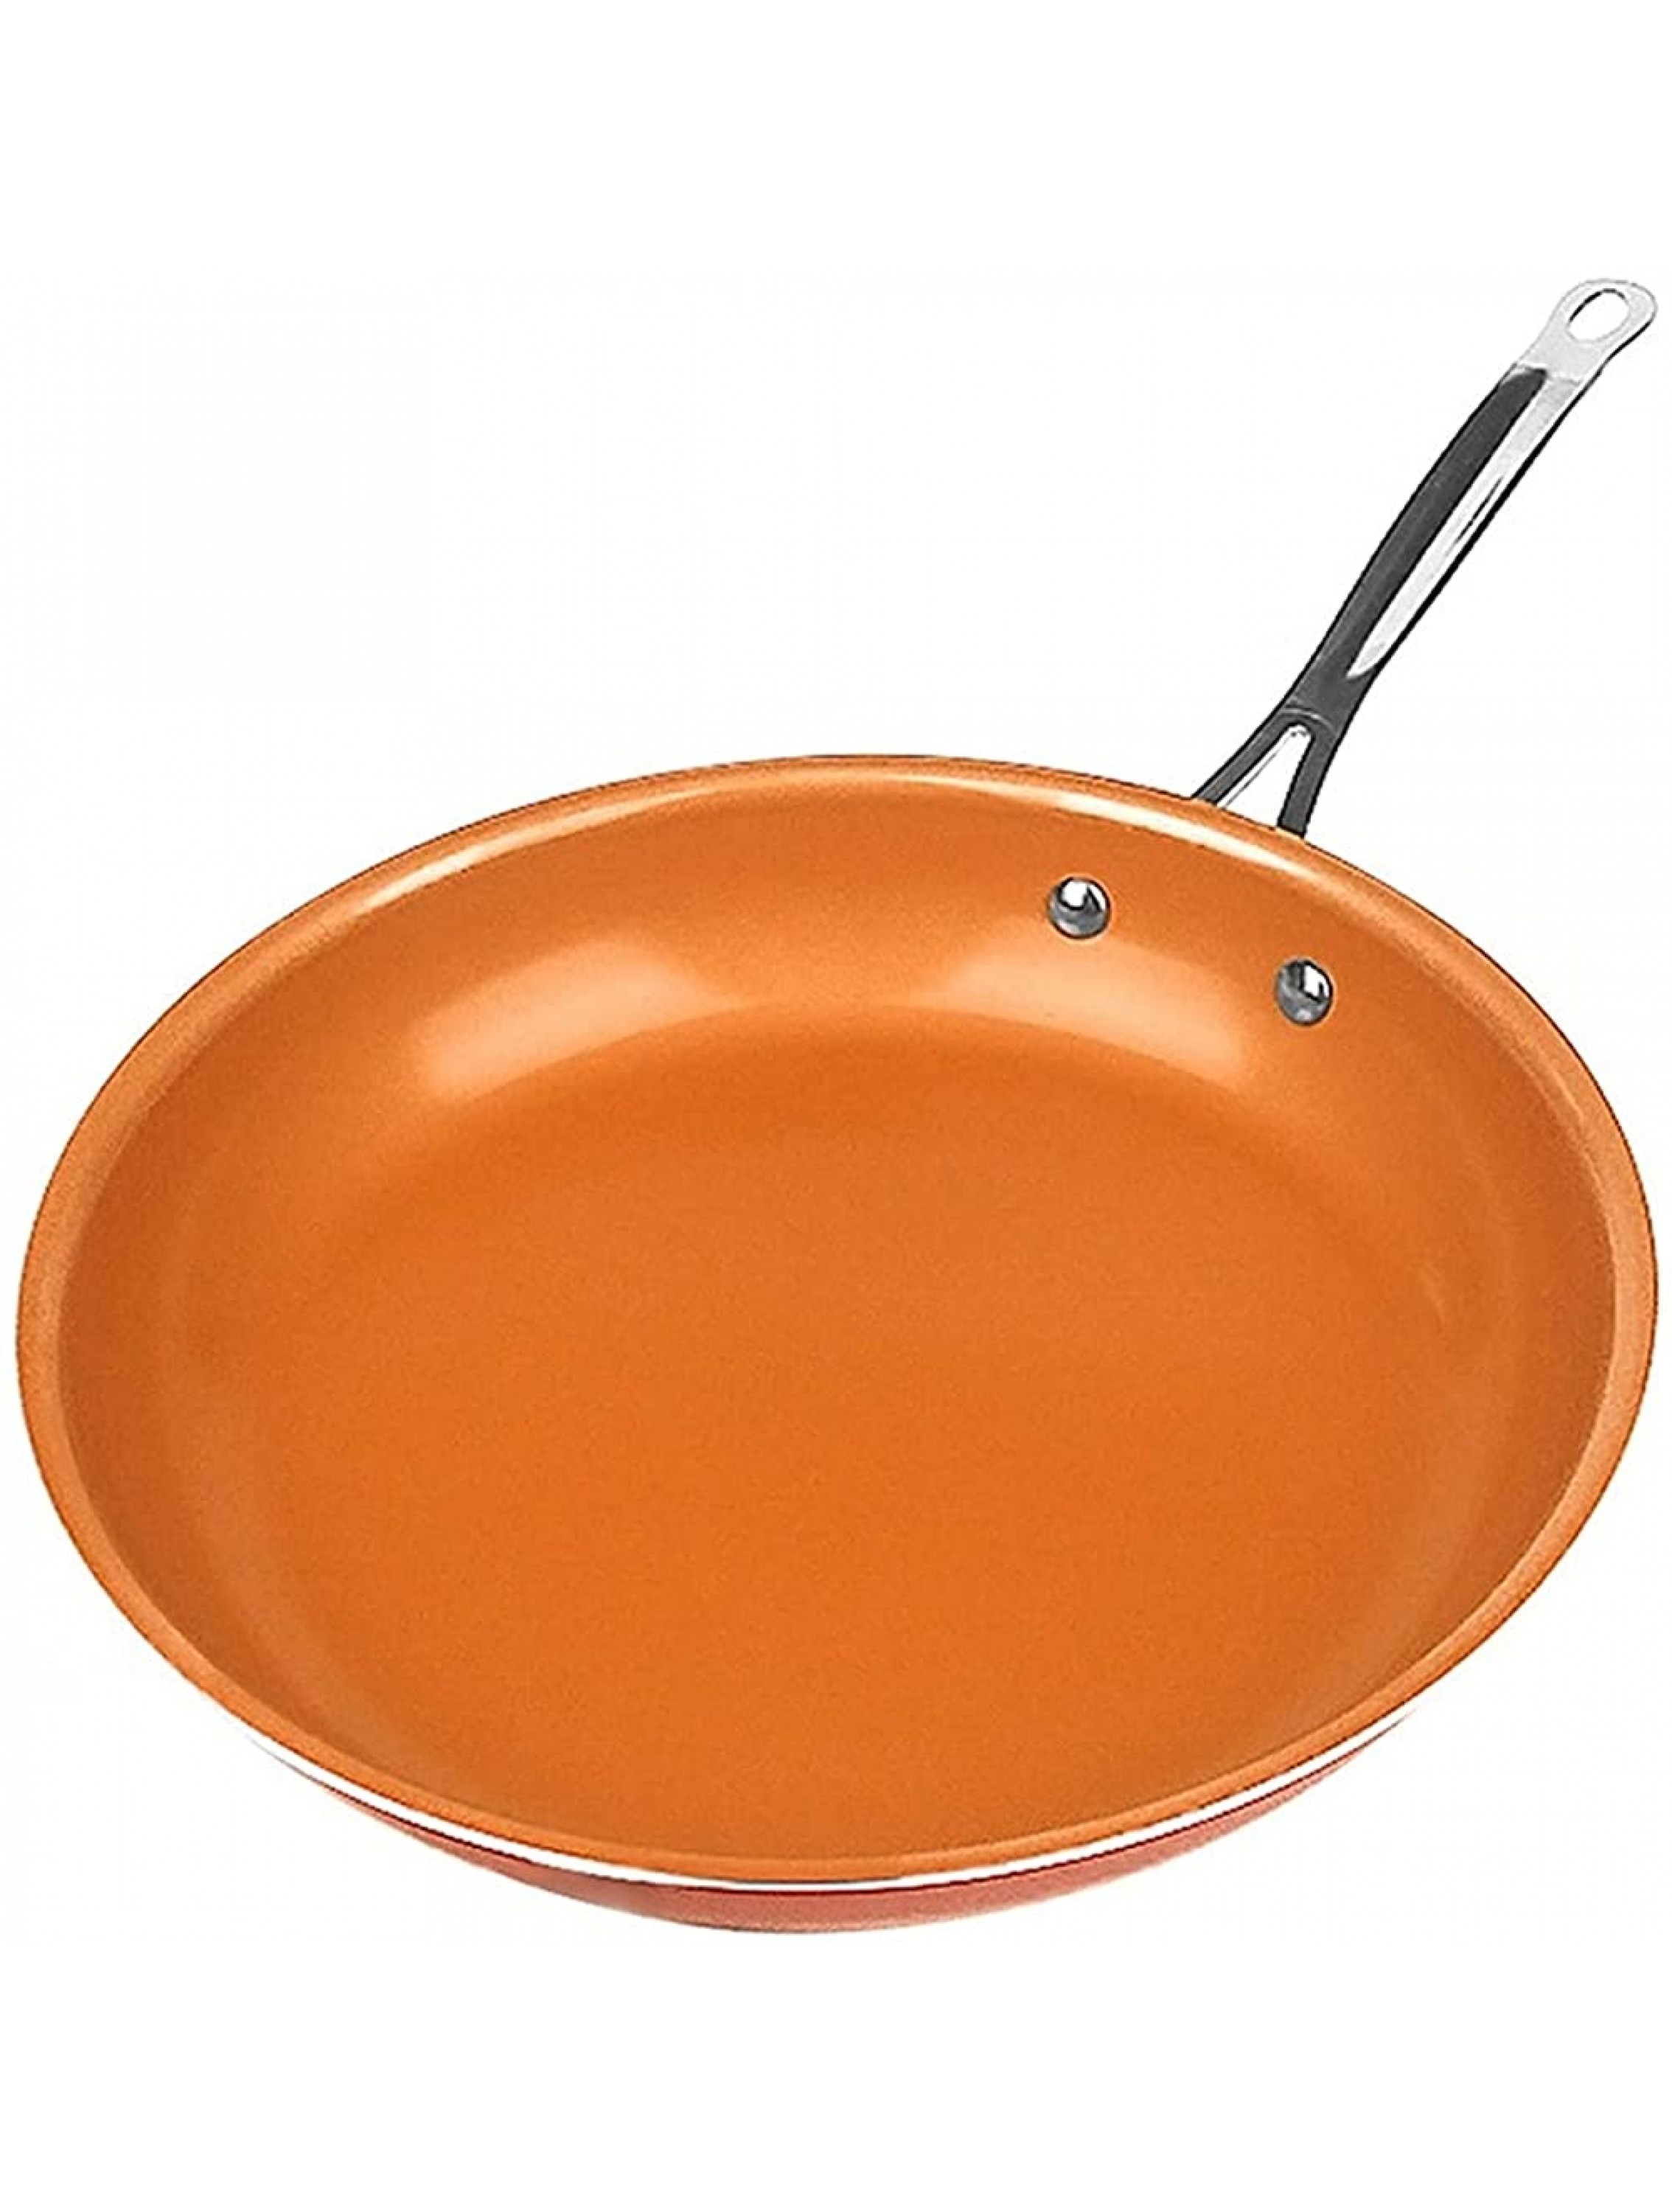 SHUOG Non-stick Copper Frying Pans Skillets With Ceramic Coating Induction Cooking Oven Cooking Pot Nonstick Pan Cookware Chef Pan Chef's Pans Color : 20cm - B7JA4X8HP